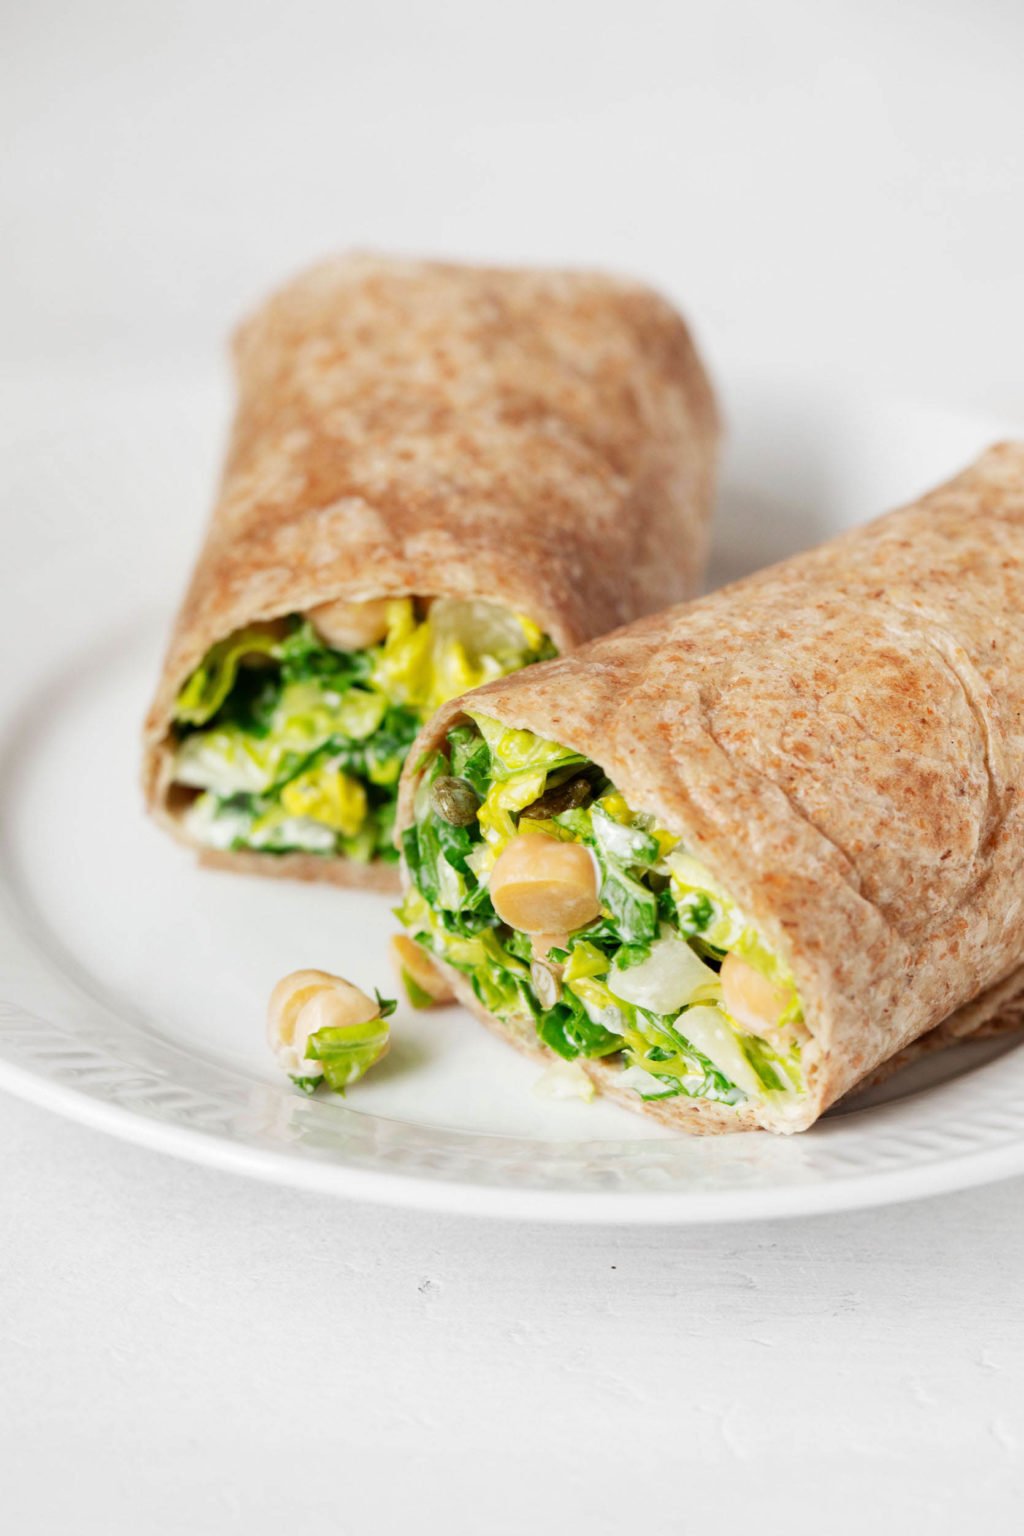 A close up of a whole wheat burrito, which has been stuffed with leafy greens and beans, then cut and served on a white, rimmed plate.